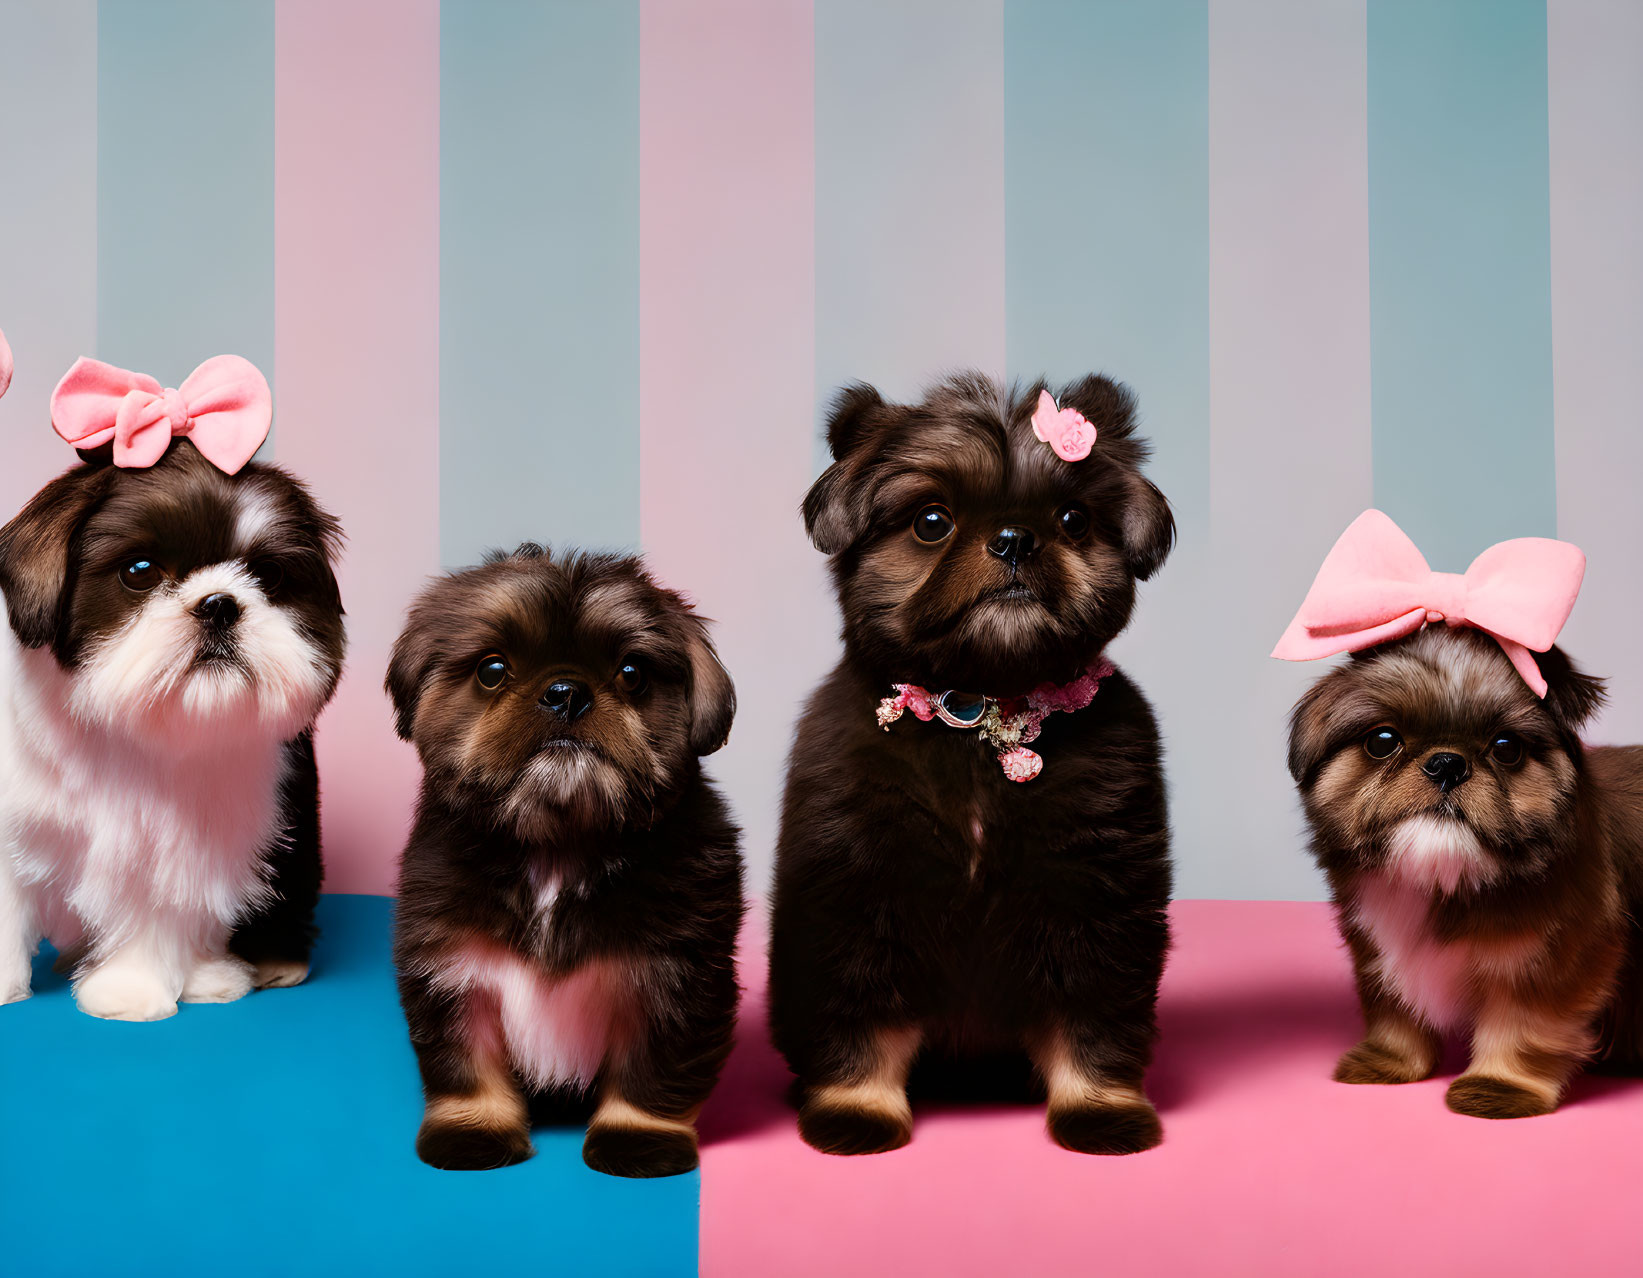 Four Cute Puppies in Bow Outfits on Striped Pink & Blue Background